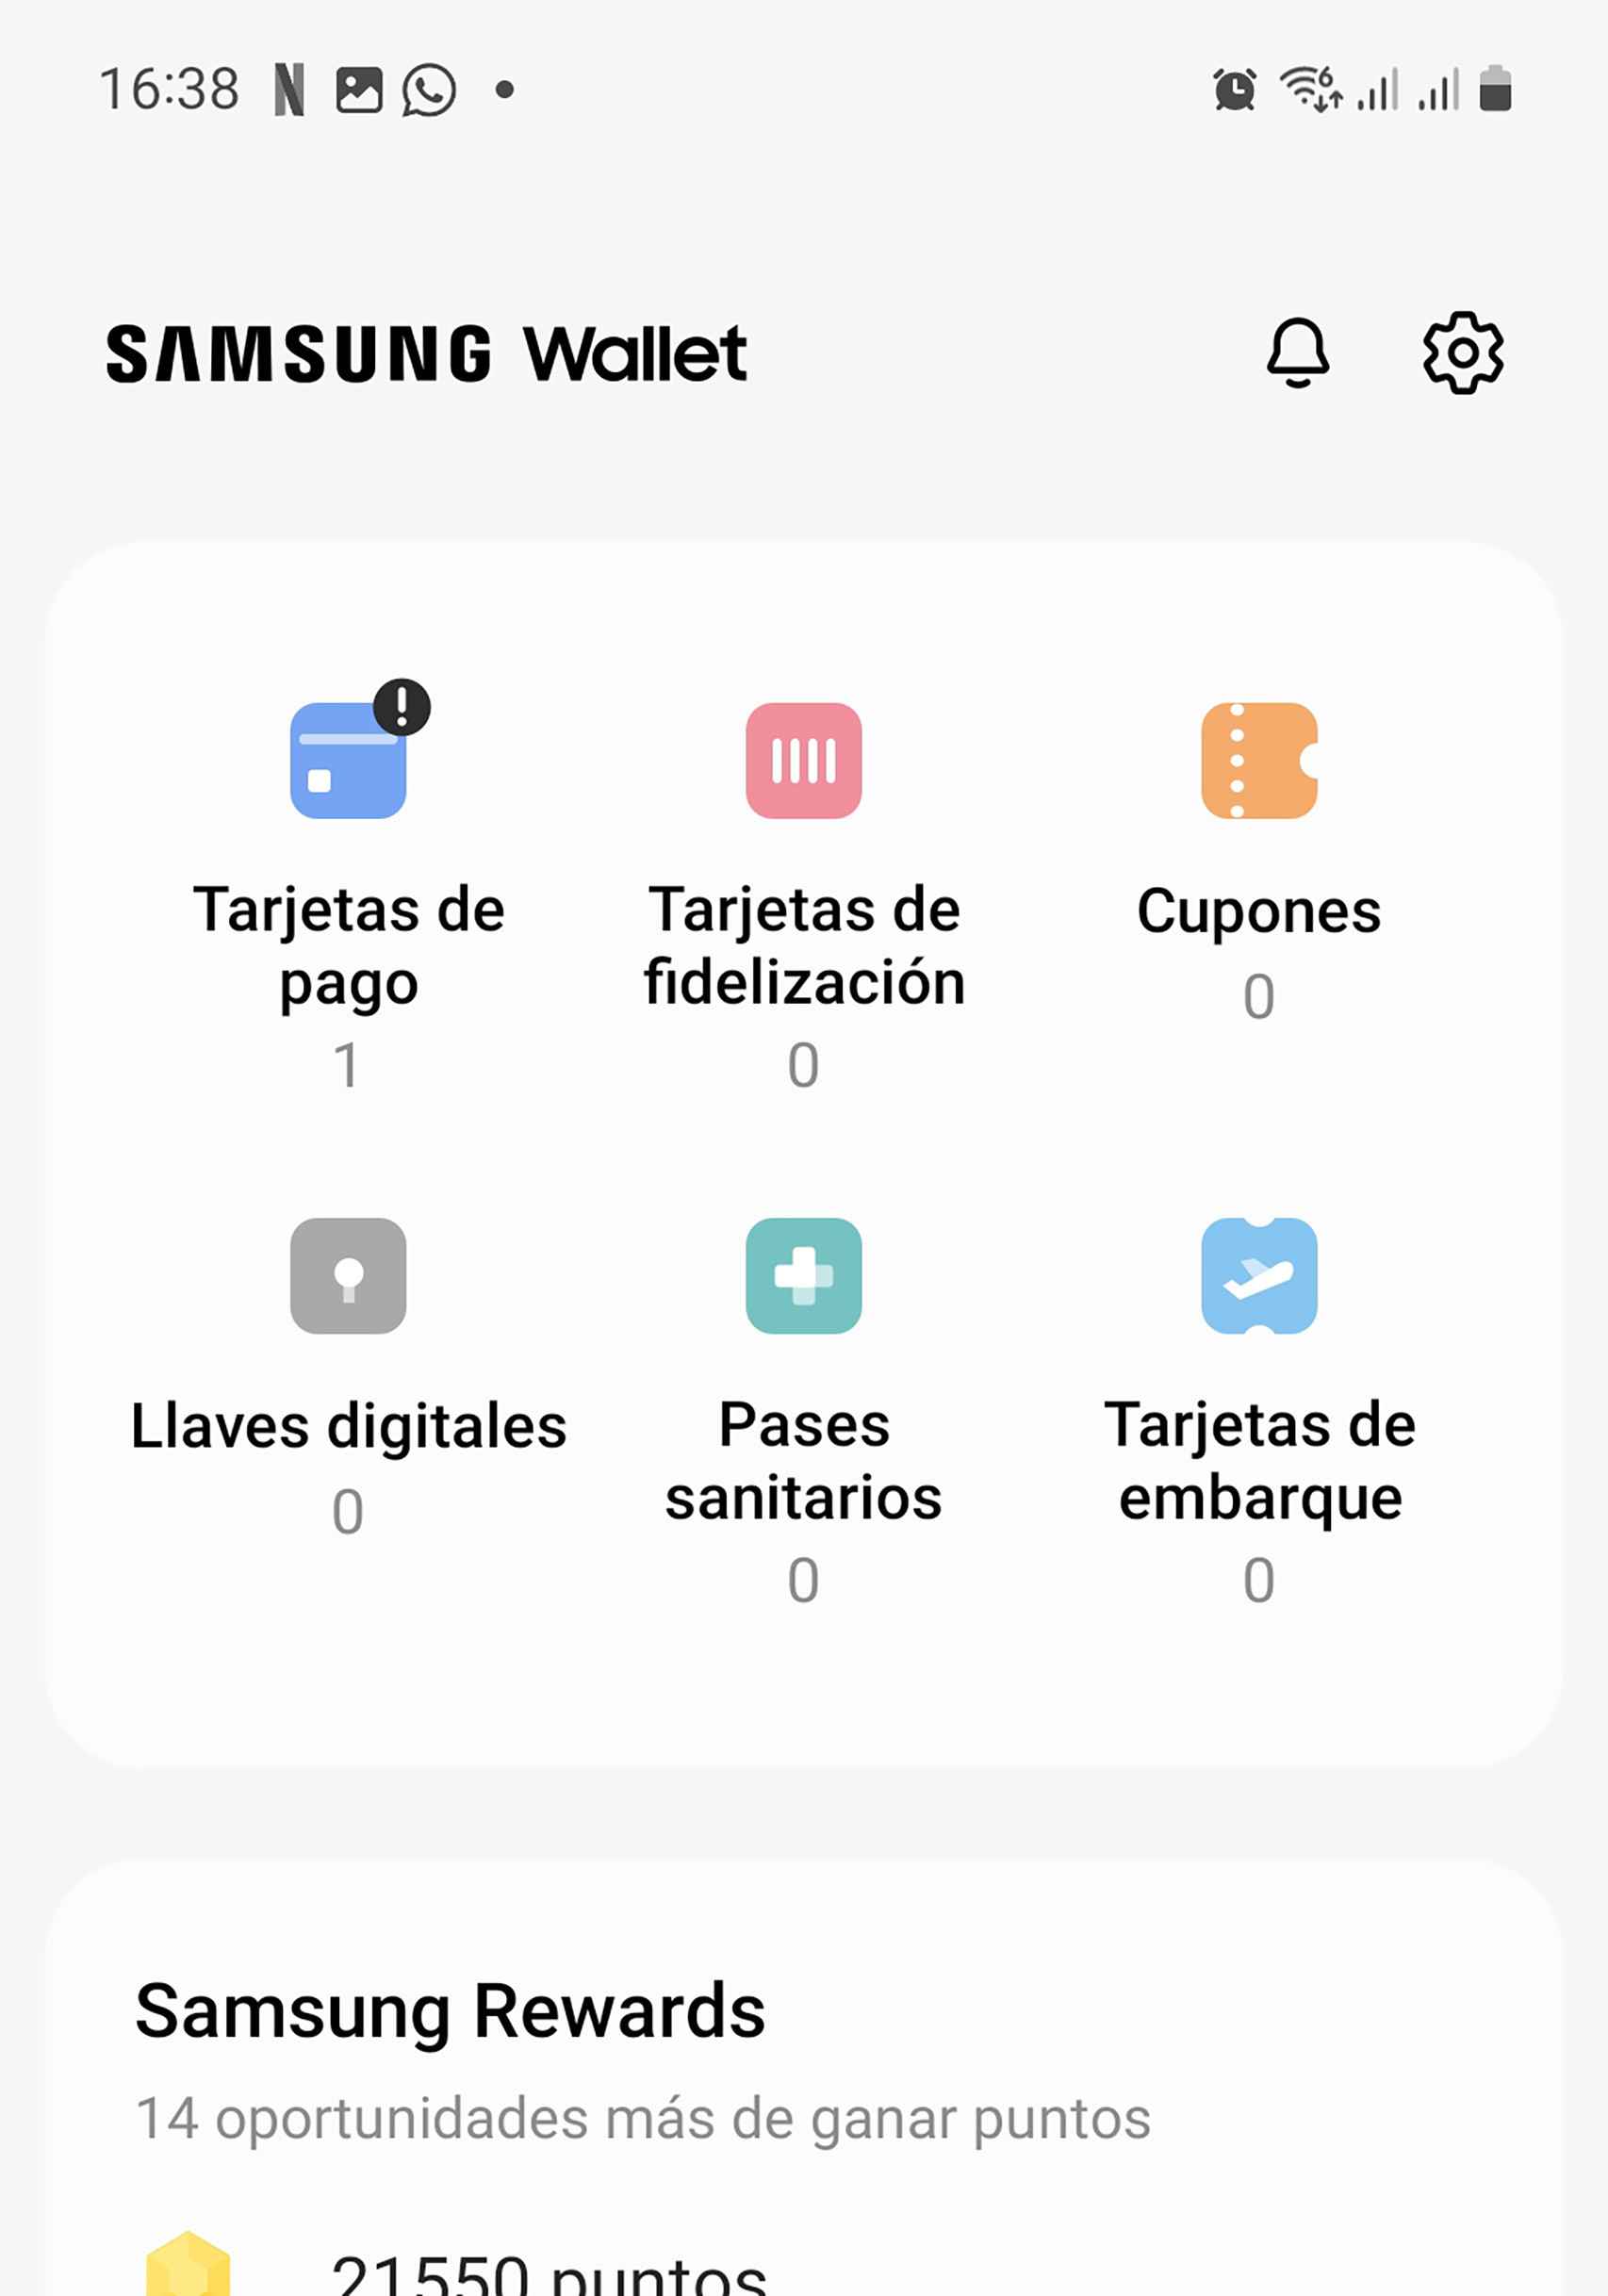 Samsung Wallet can be erased, but it's essential for NFC payments